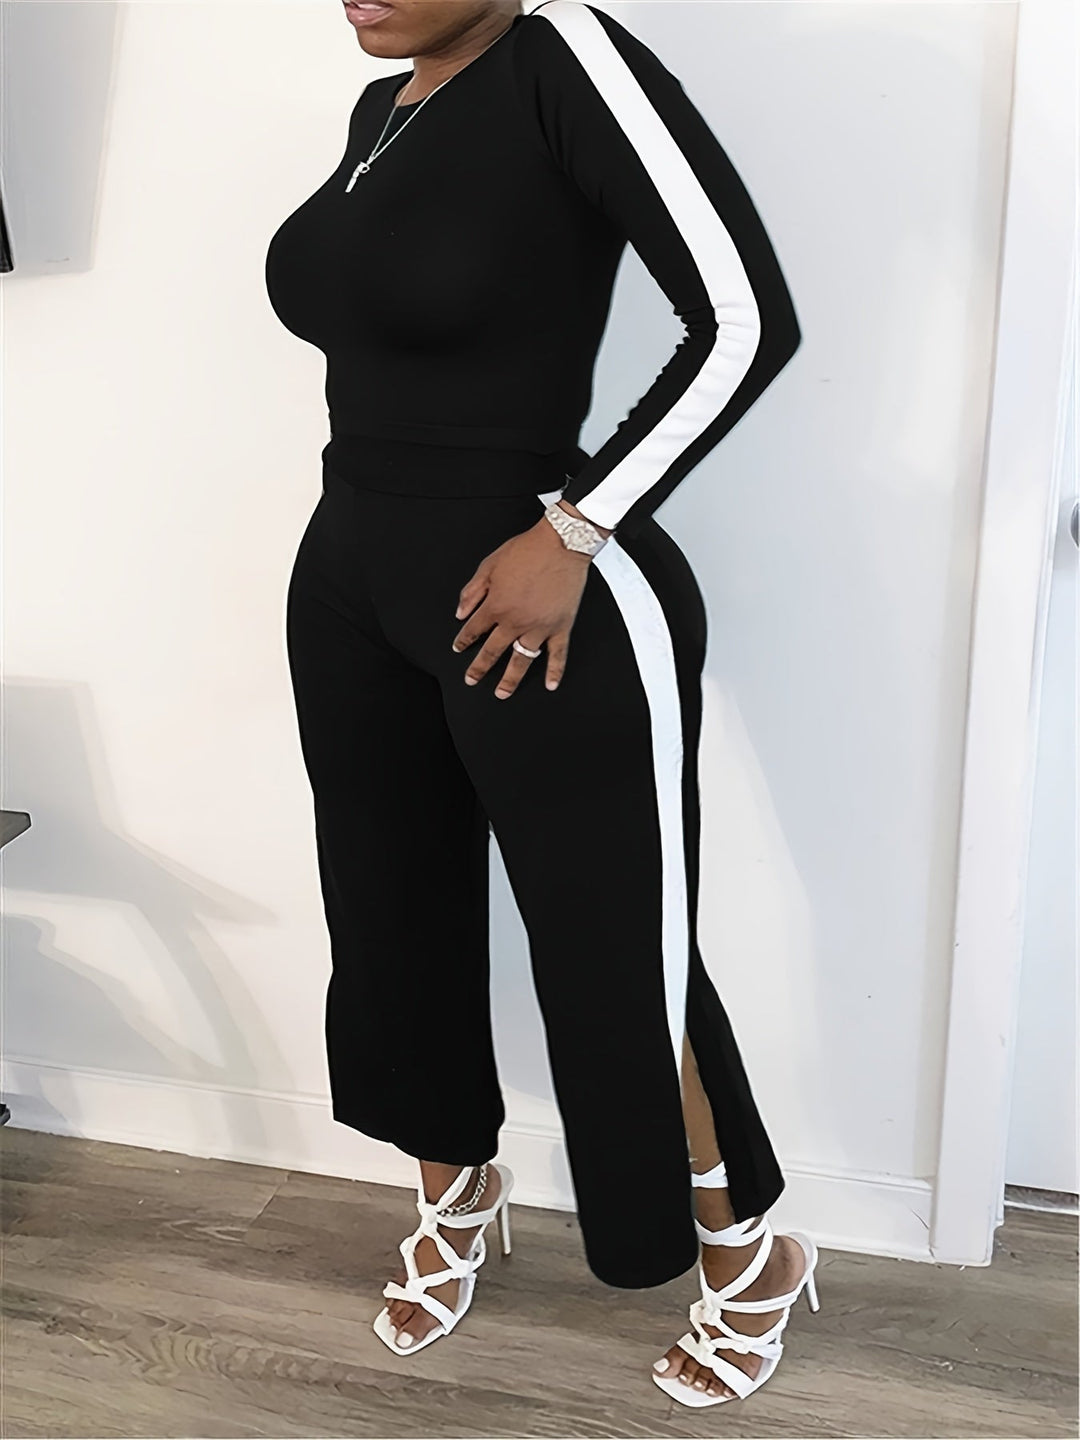 Sexy Striped Long Sleeve Form-fitting Top and Pants Activewear Set 